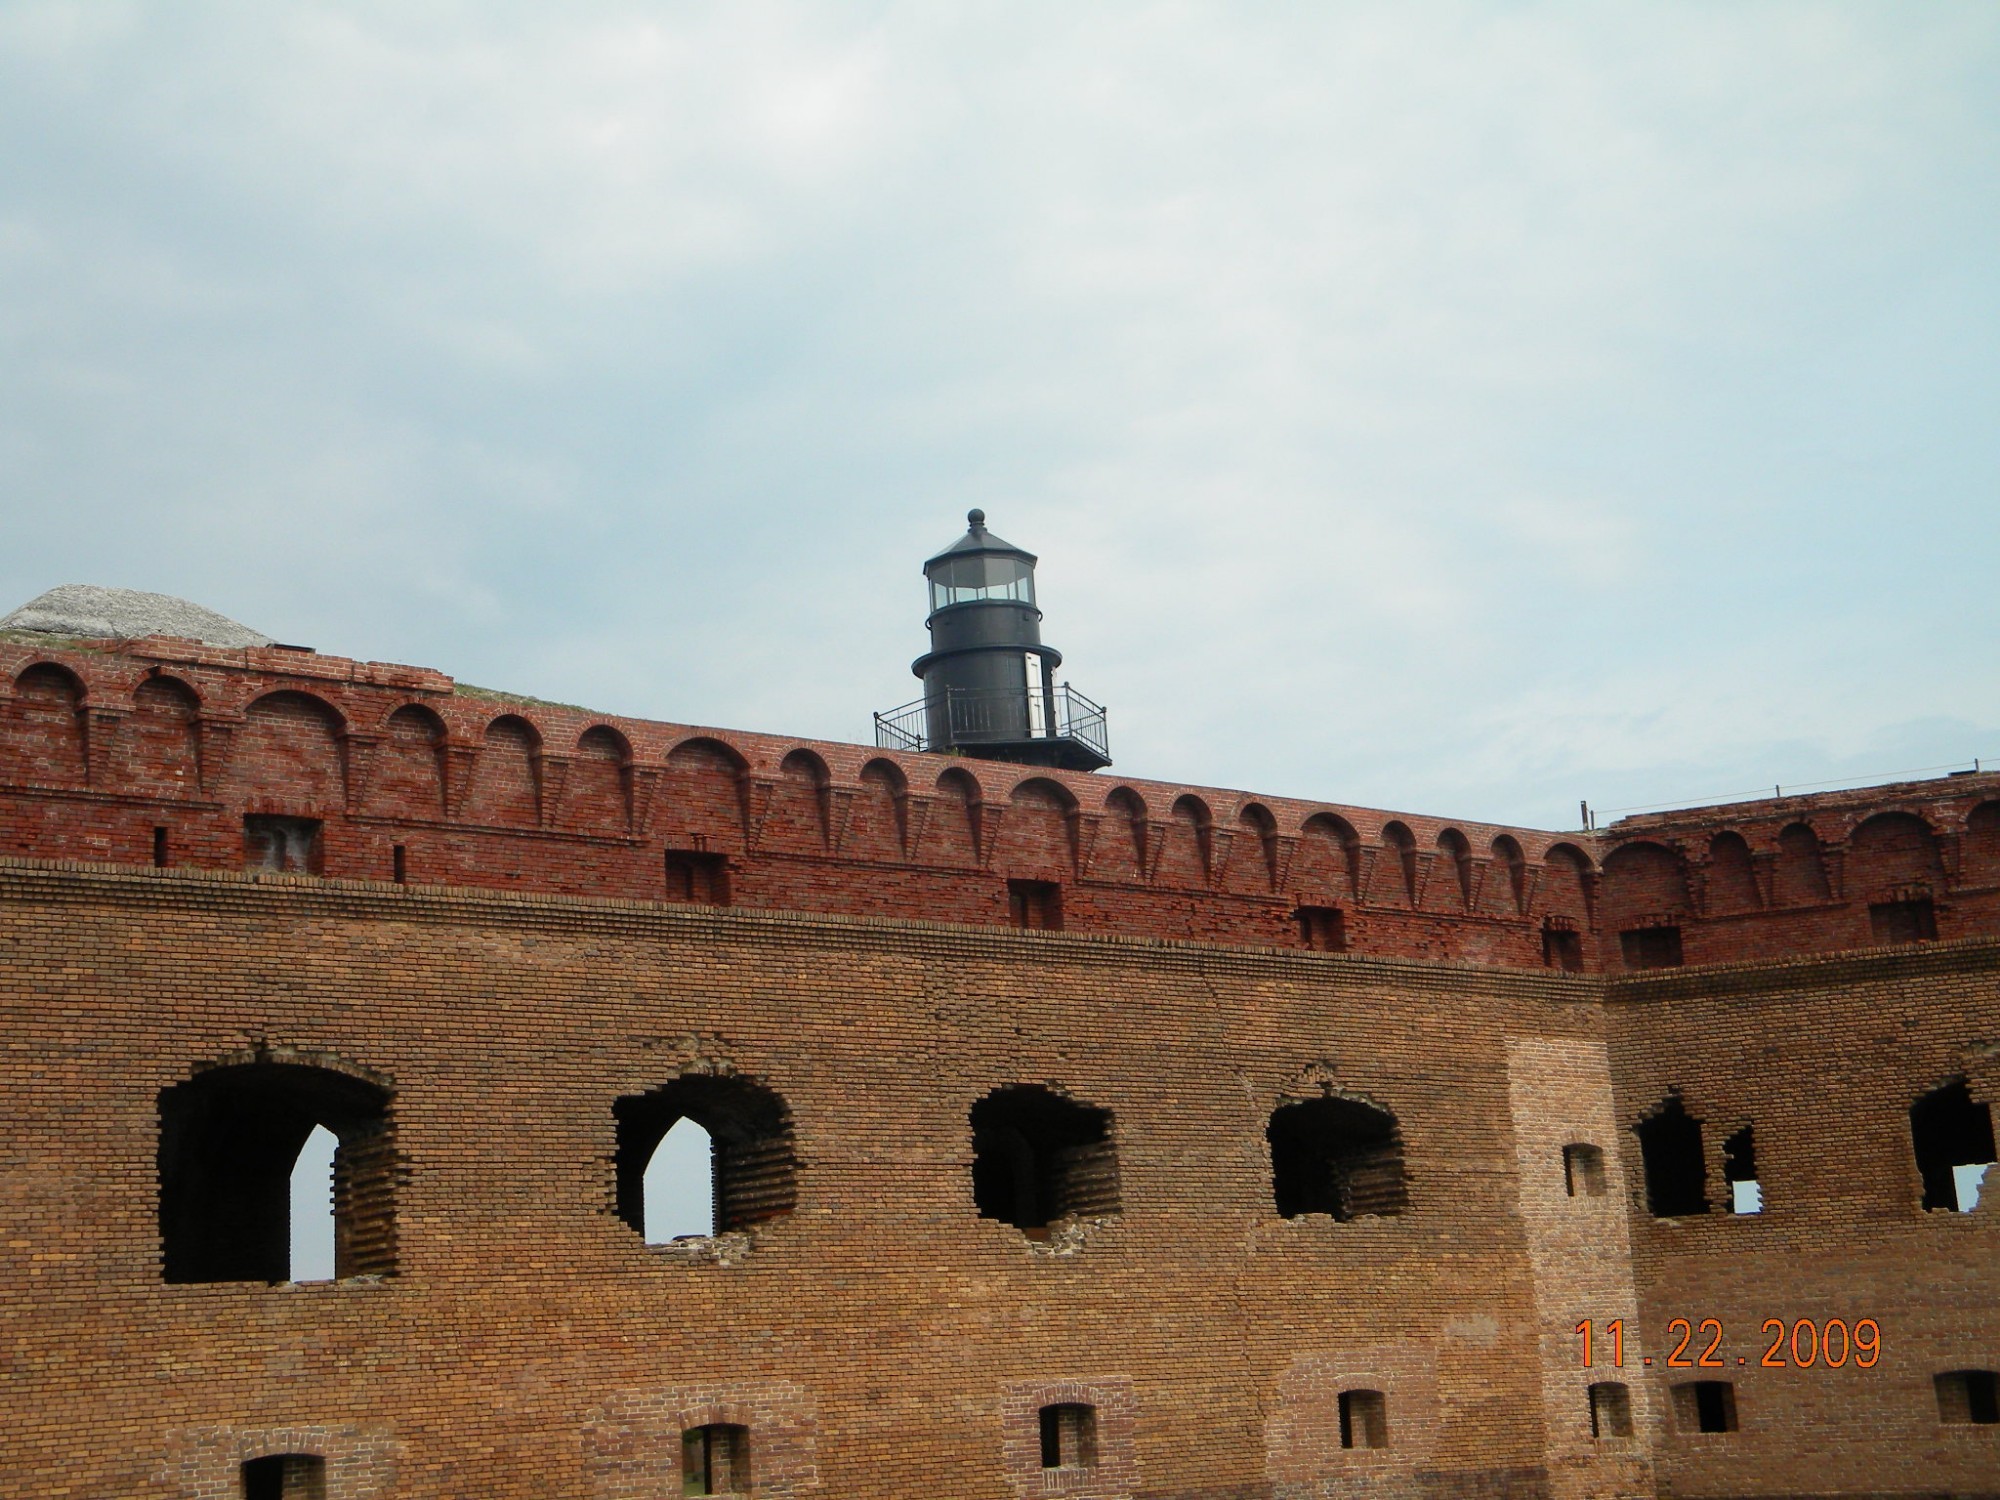 Fort dry Tortugas